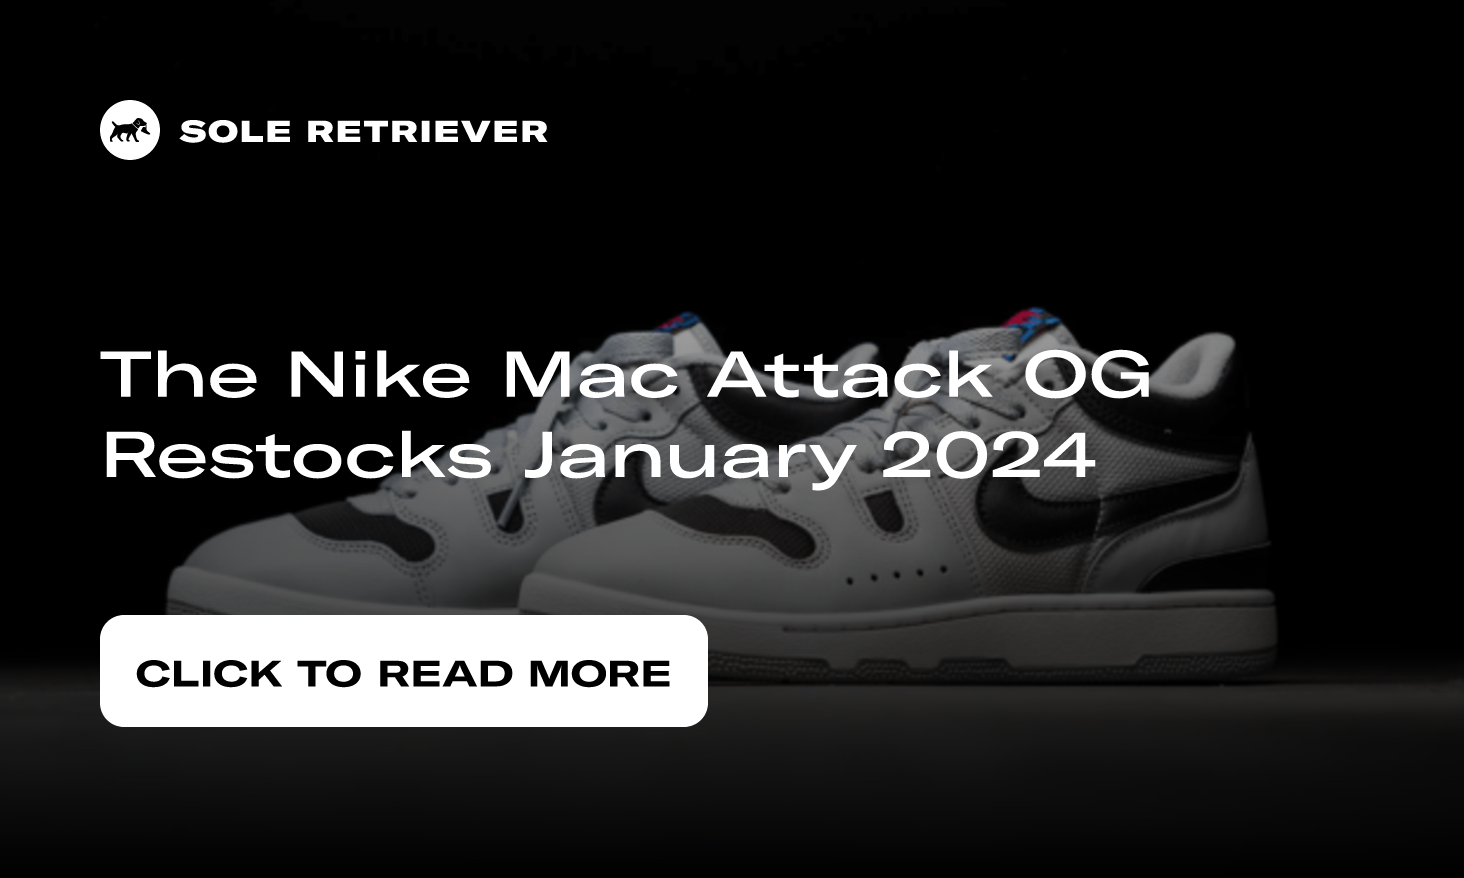 The Nike Mac Attack Returns in Its OG Colorway June 23